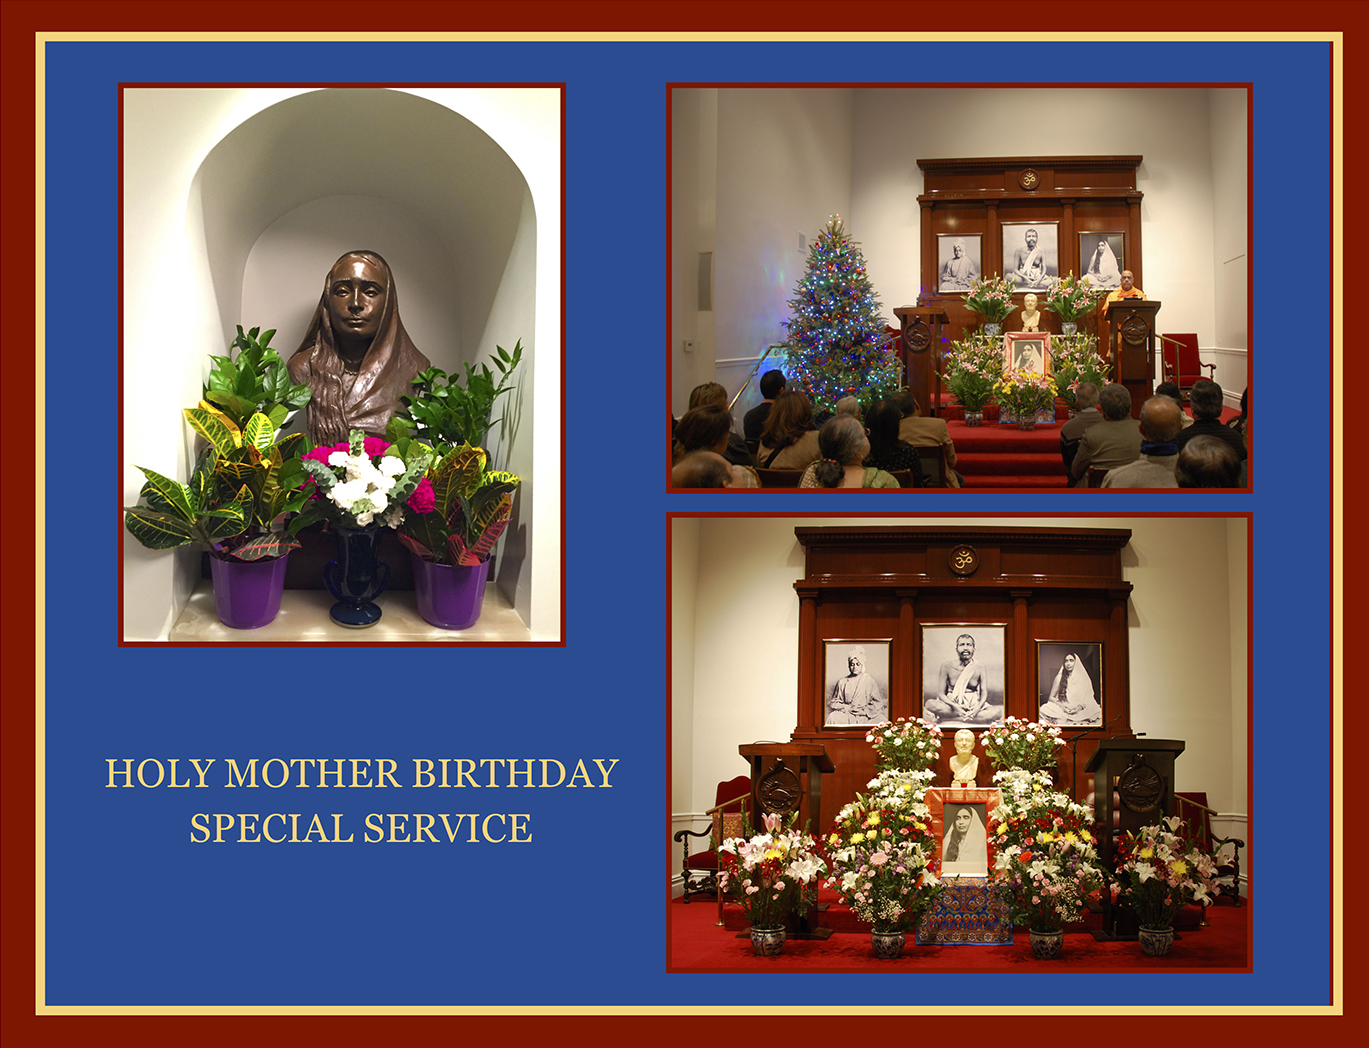 Holy Mother Birthday Special Service.